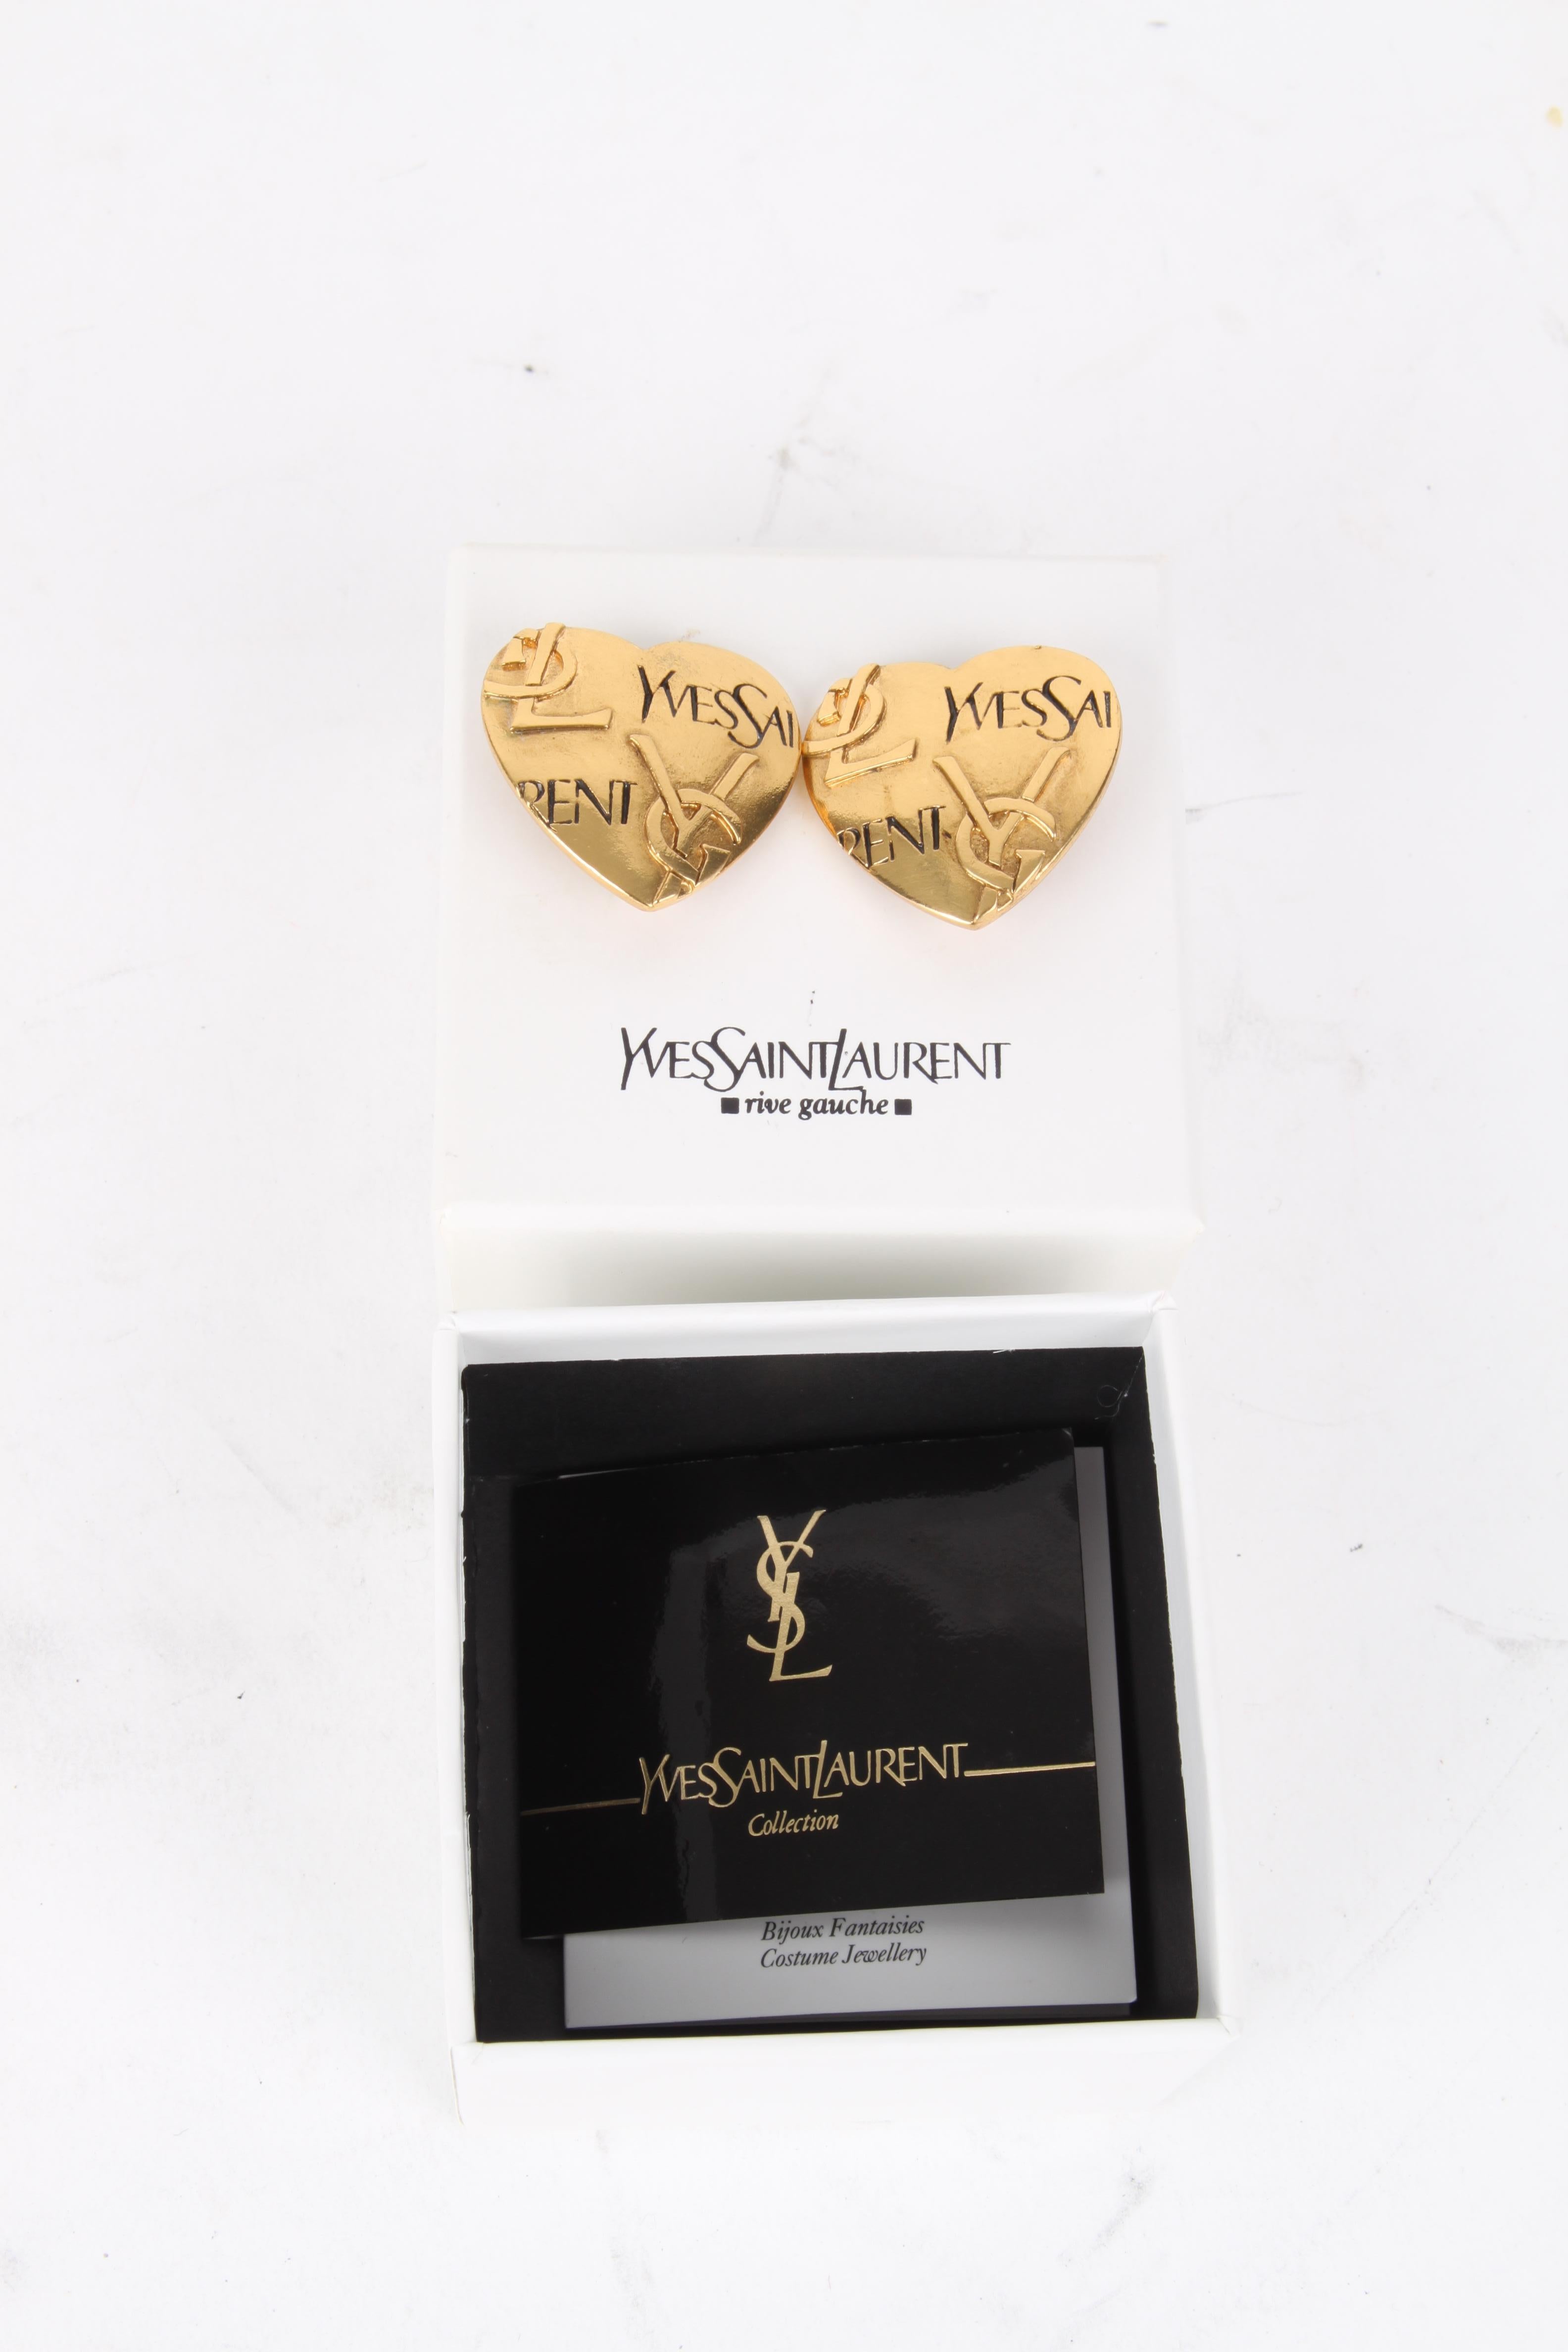 Yves Saint Laurent Gold-Plated Logo Heart Clip-On Earrings.

These earrings feature a lux gold-plated logo exterior with a matching glossy finish. The earrings feature a gold-plated backside clip fastening that carries the authenticity stamp. The